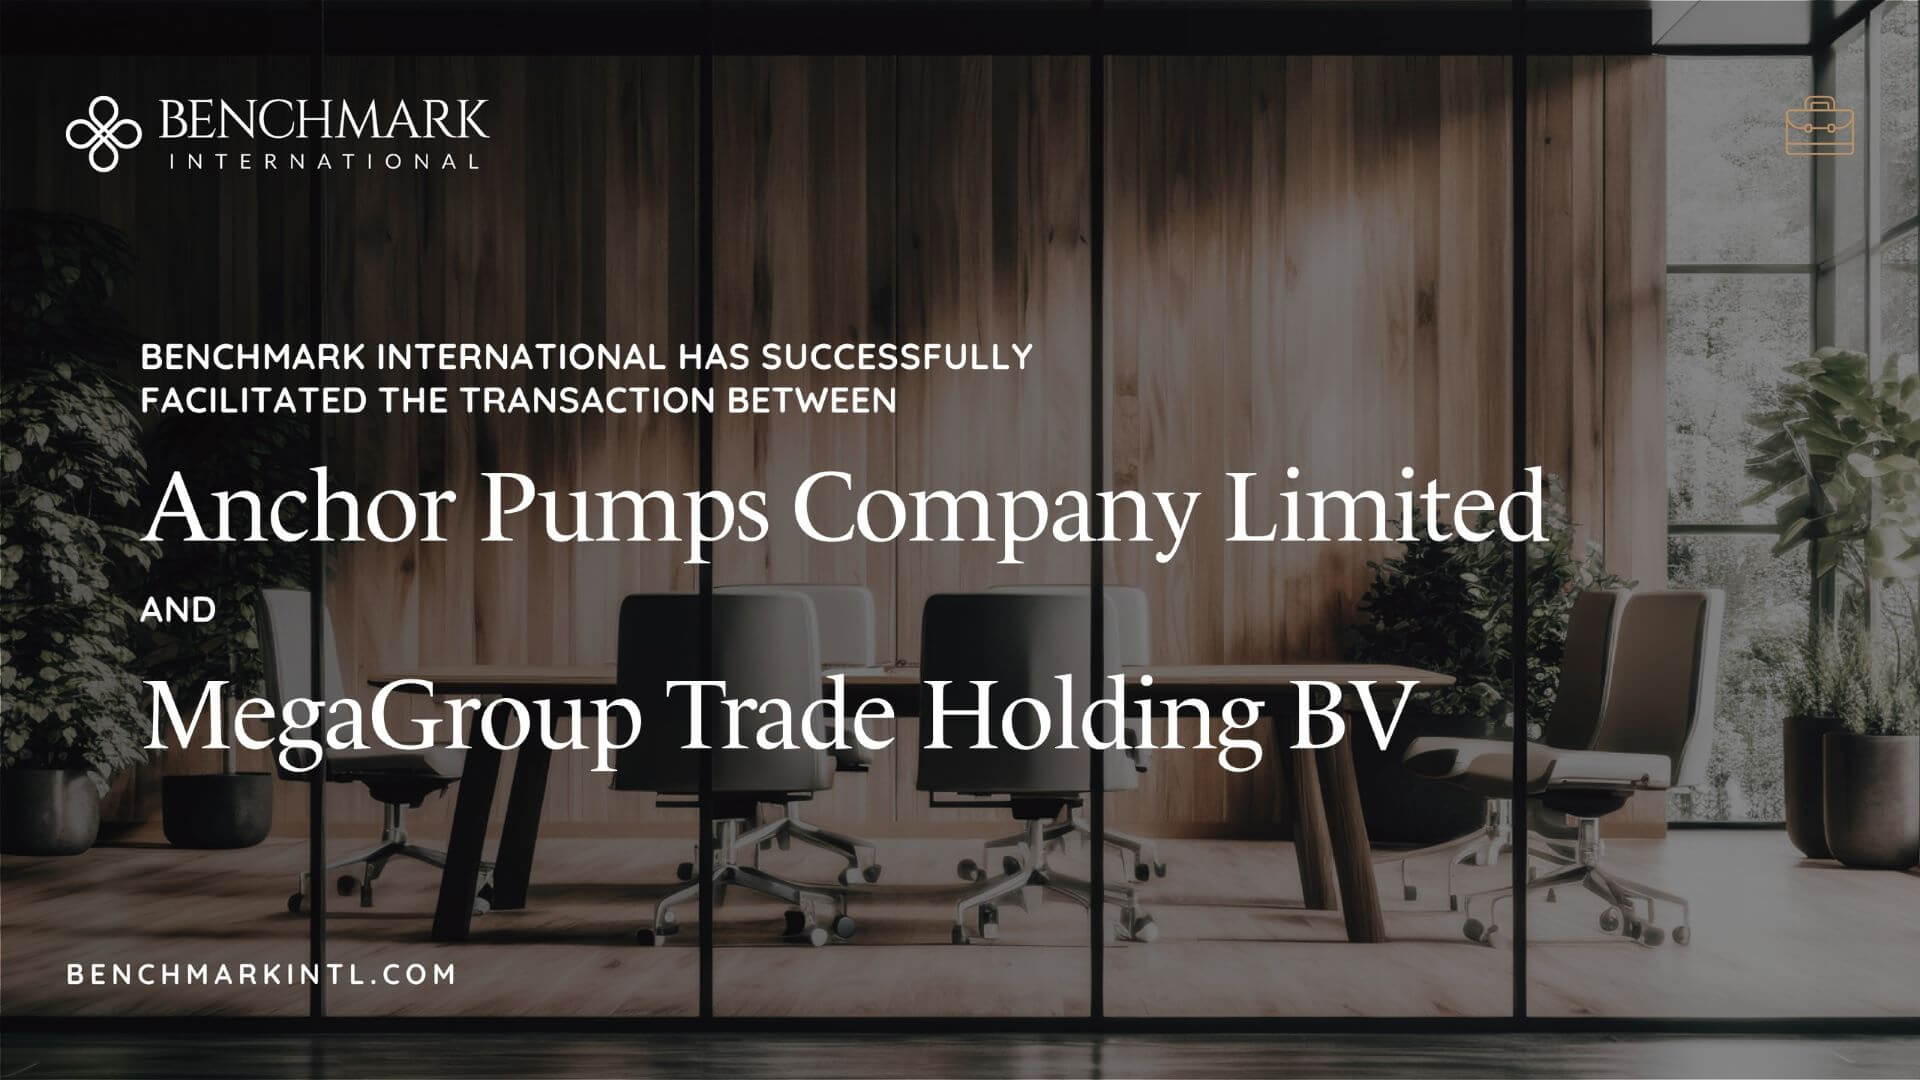 Benchmark International Successfully Facilitated the Transaction Between Anchor Pumps Company Limited and MegaGroup Trade Holding BV